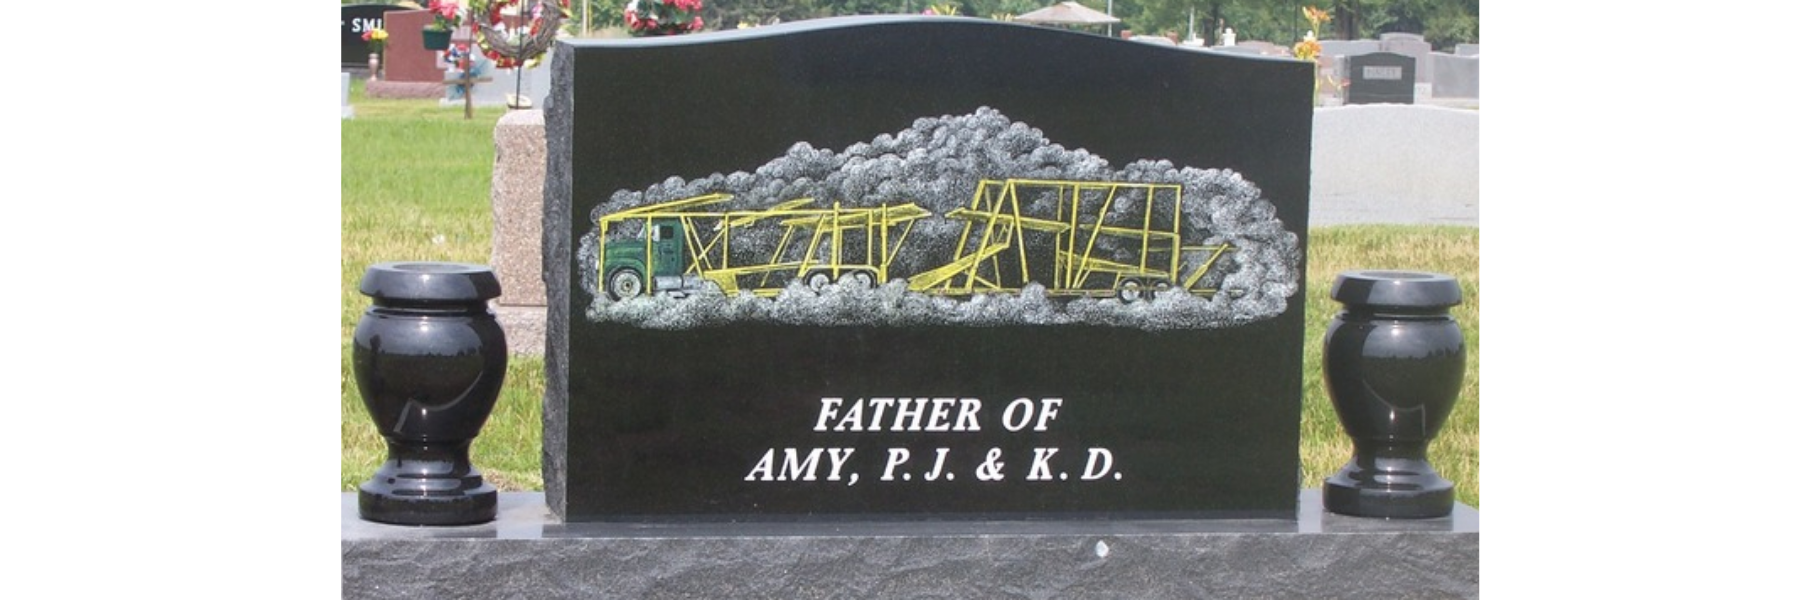 Custom artwork monument with a truck rig on it.